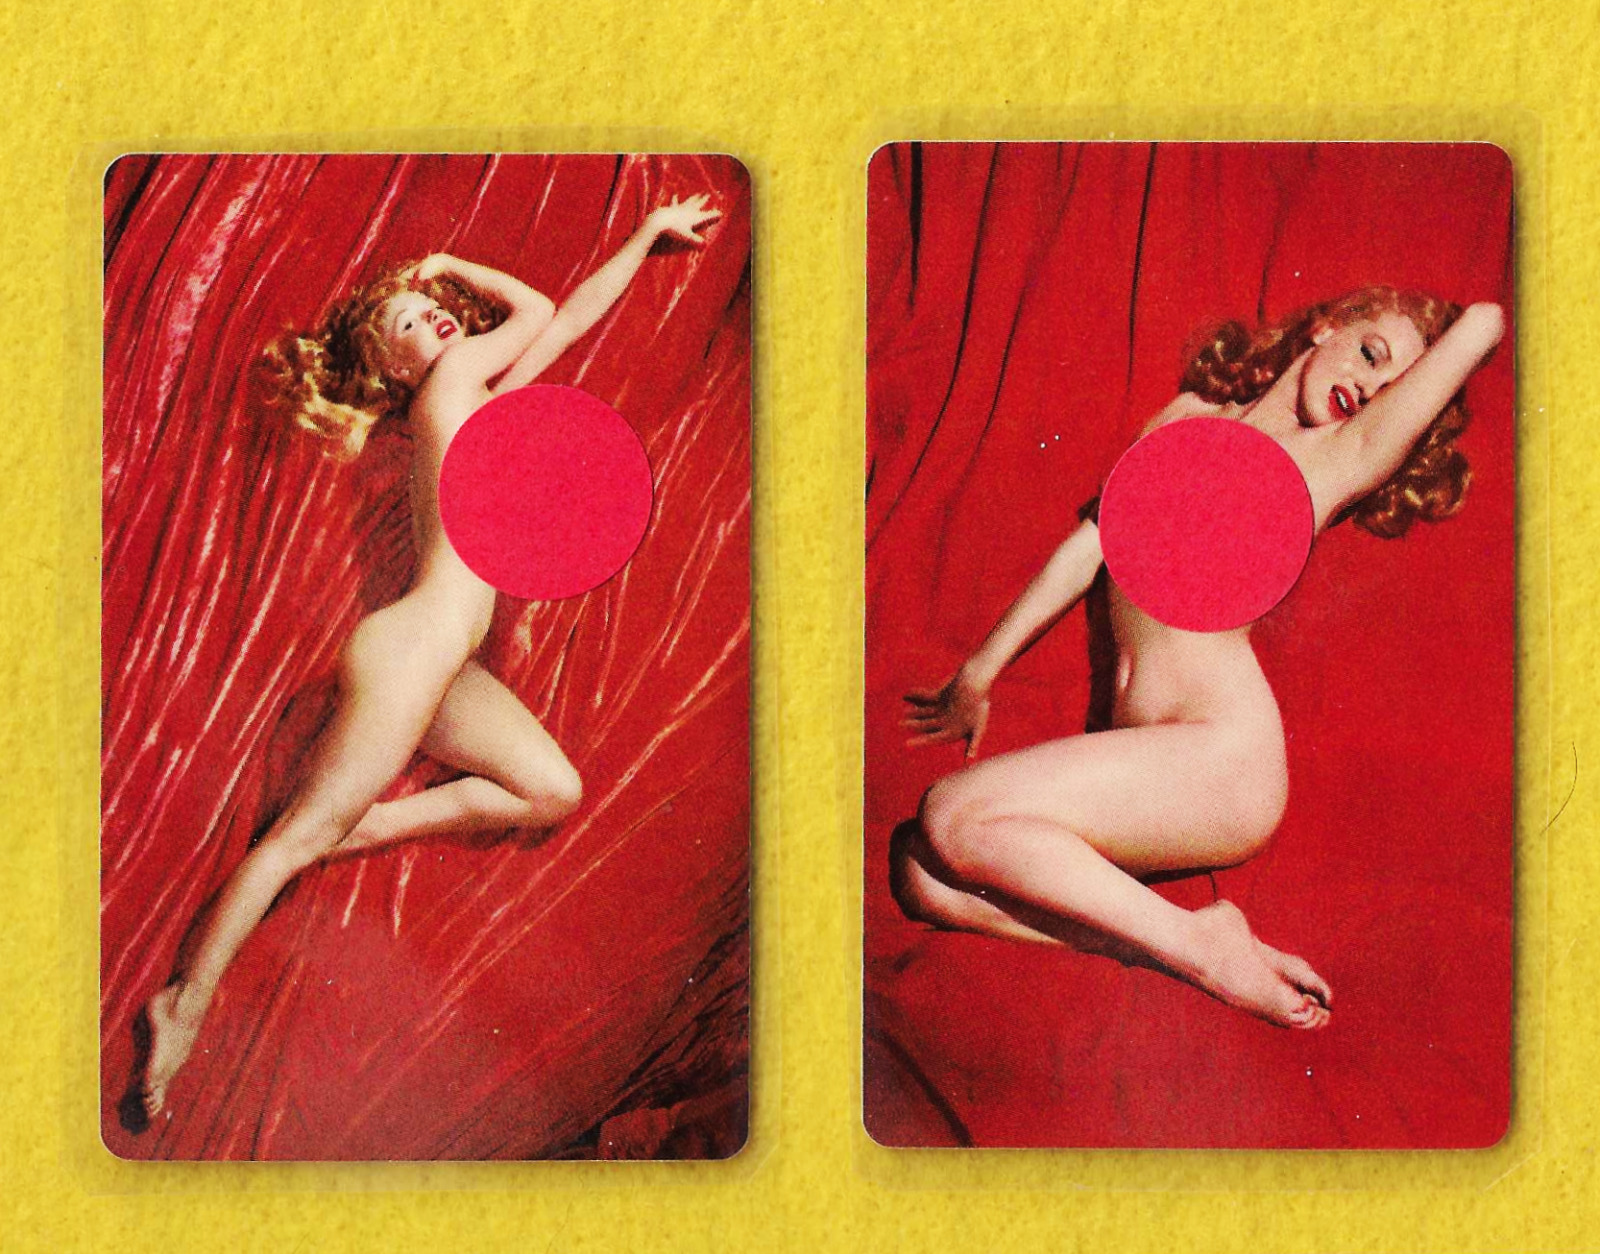 2 Vintage MARILYN MONROE Pinup Playing Card Magnets.  1949 Photos on 1976 Cards